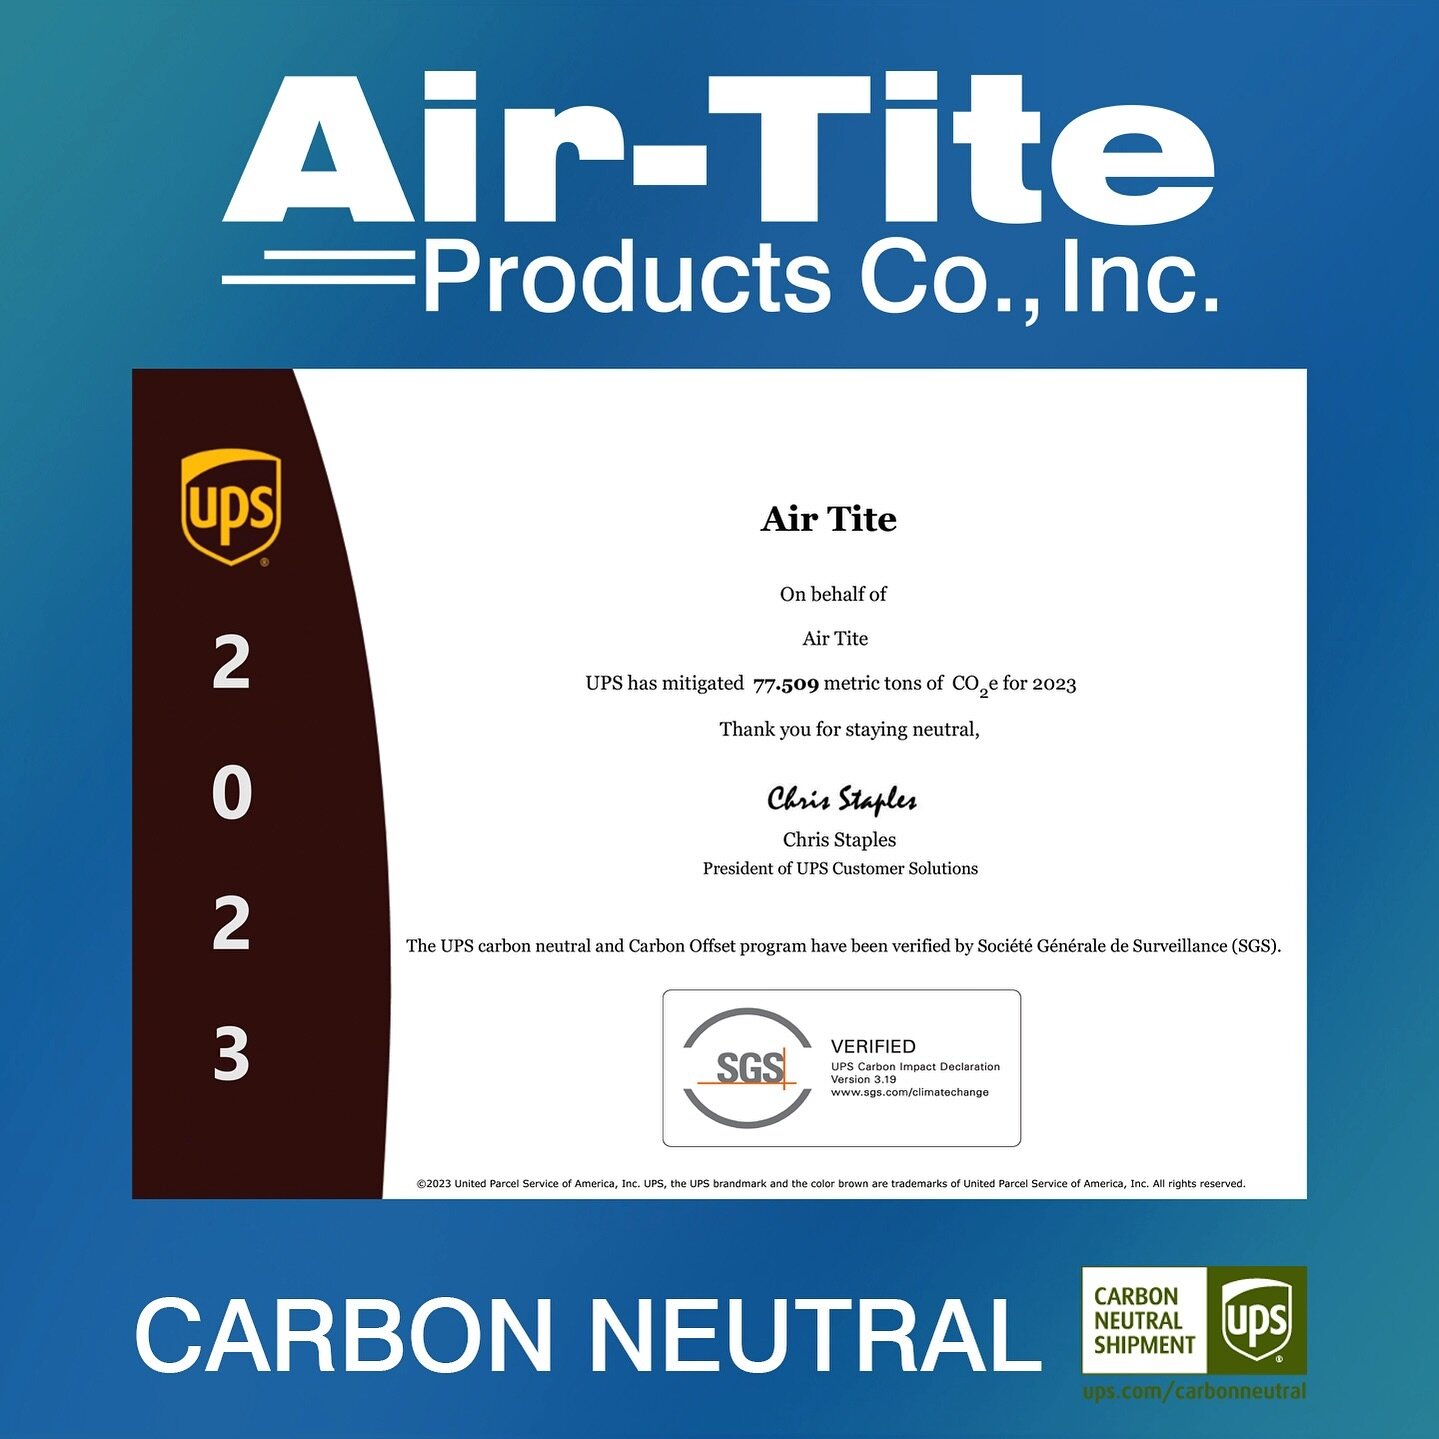 🌿 For the past 13 years, Air-Tite has proudly partnered with UPS for their Carbon Offset program to reduce our carbon footprint. This past year, we were able to mitigate 77.509 metric tons of CO2 emissions. Air-Tite is actively searching for ways to